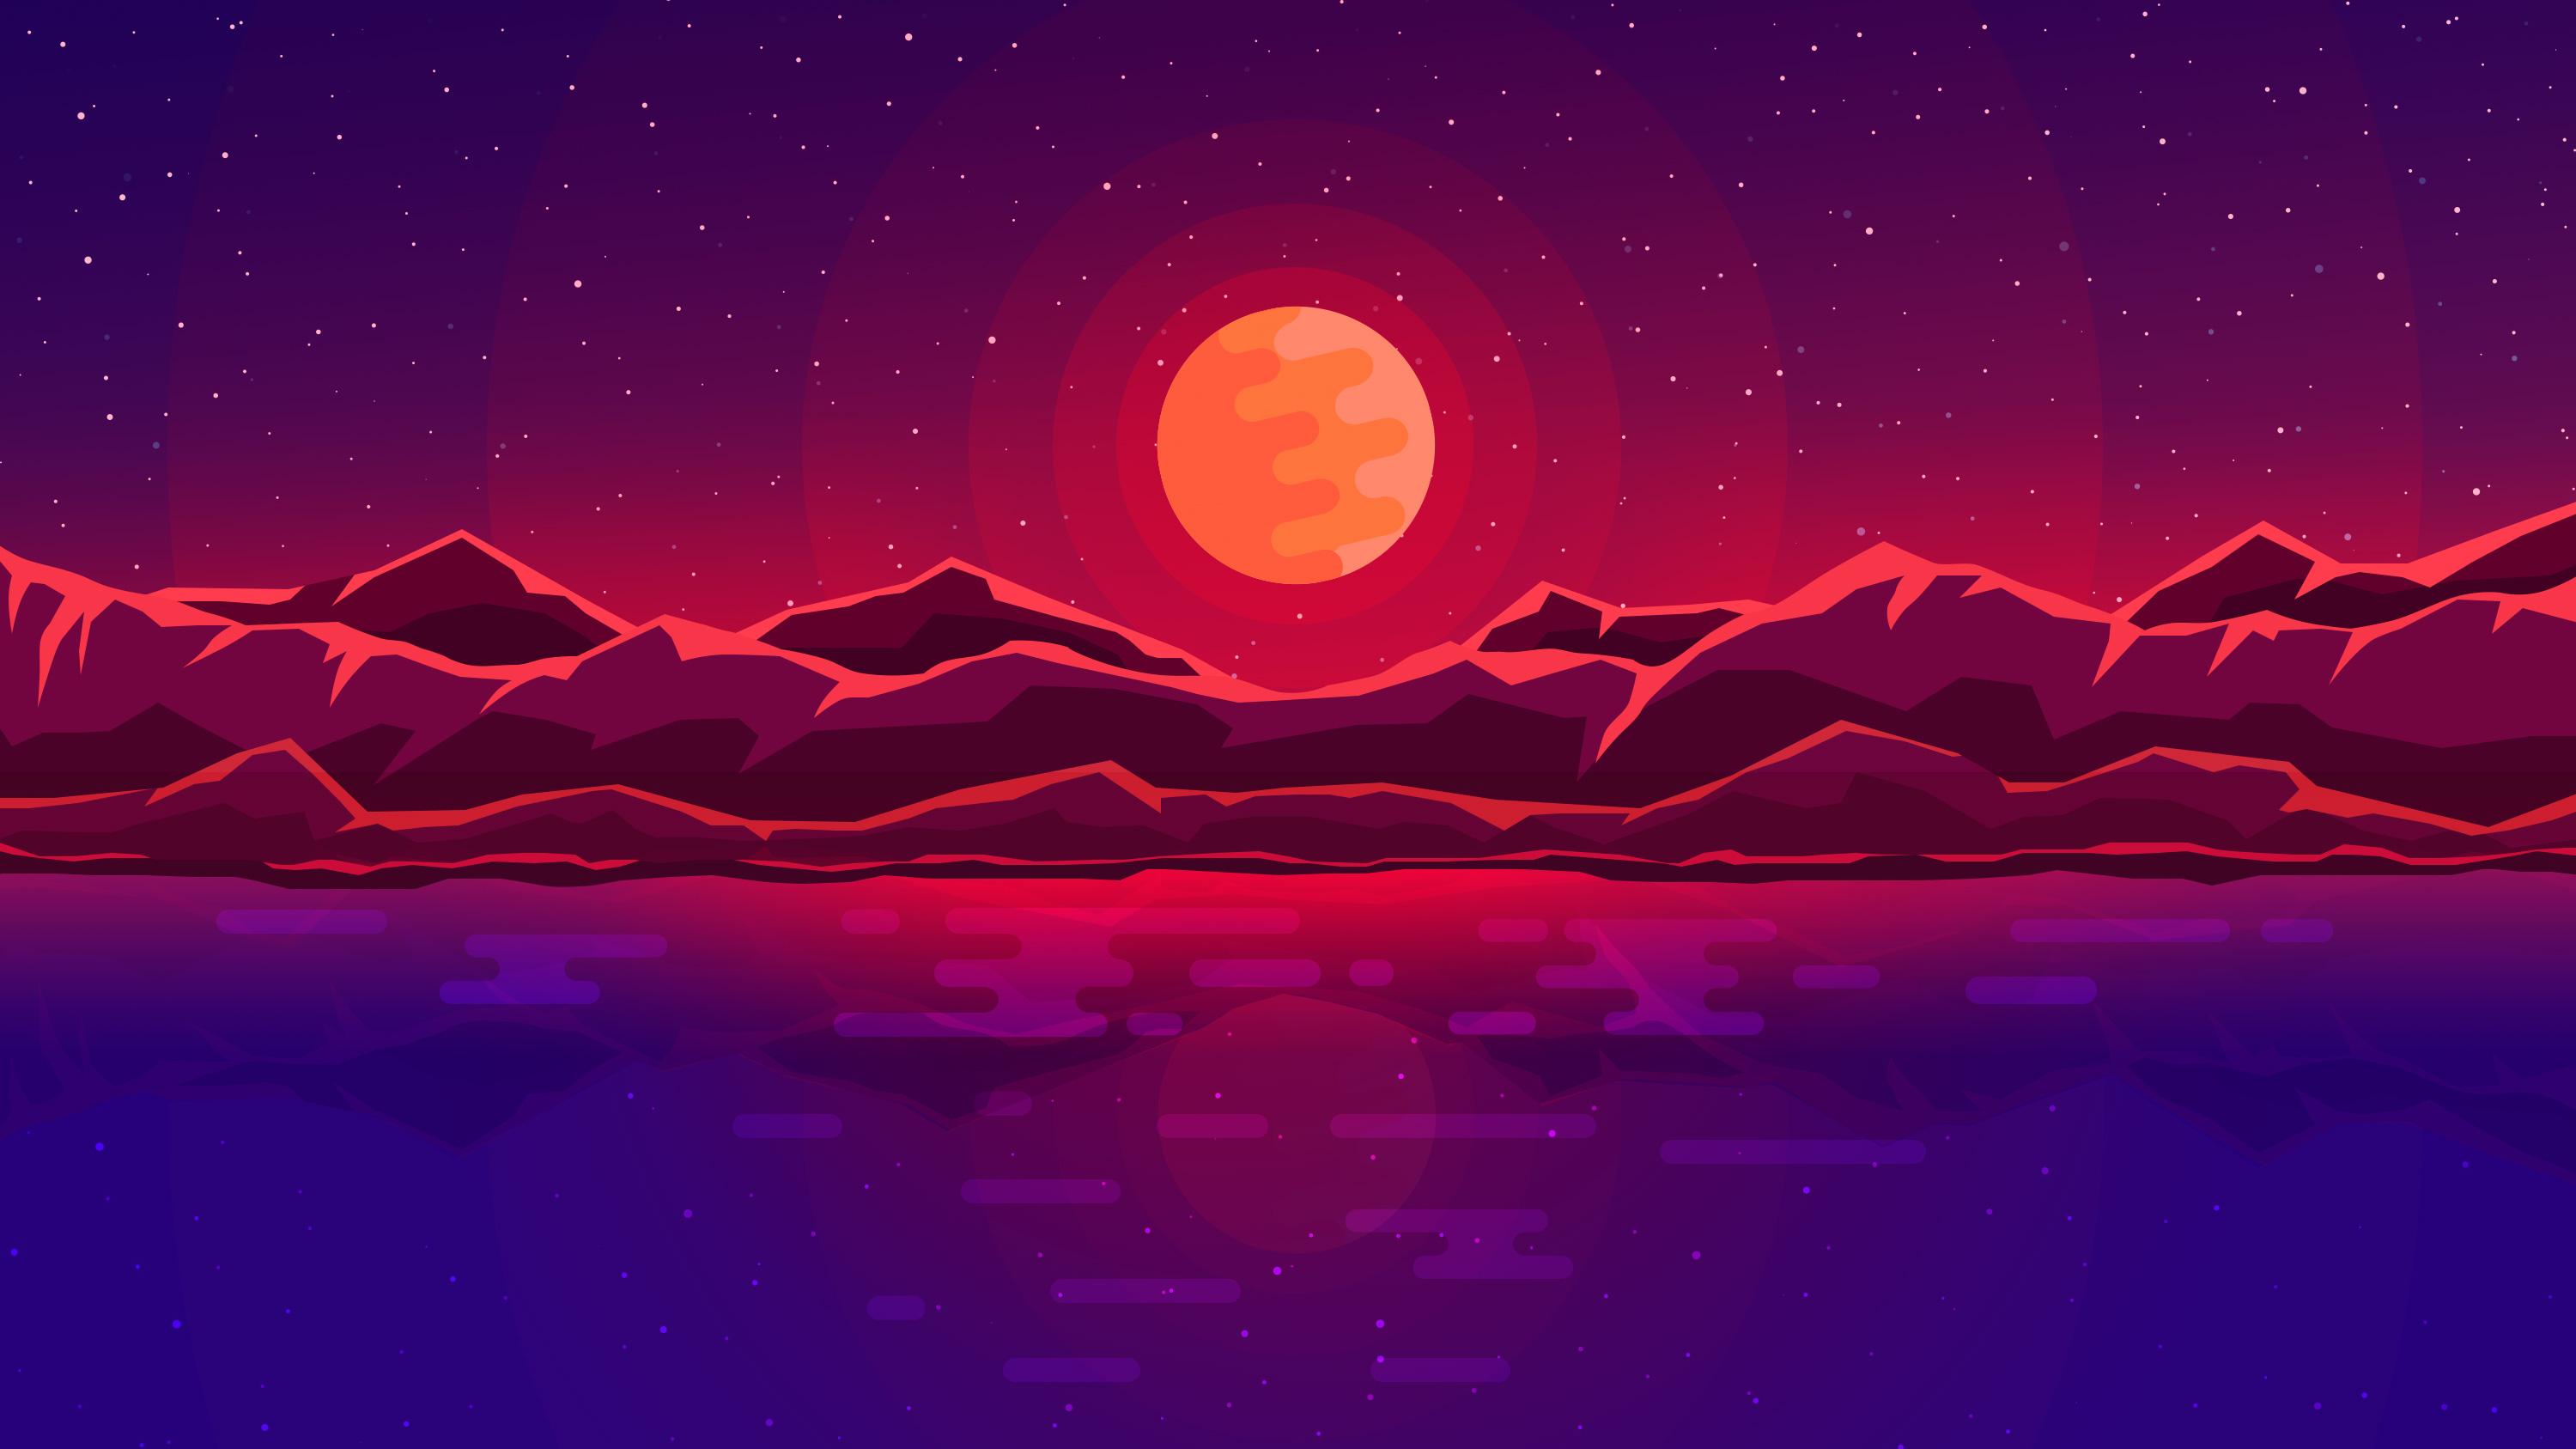 Moon Rays Red Space Sky Abstract Mountains, HD Artist, 4k Wallpaper